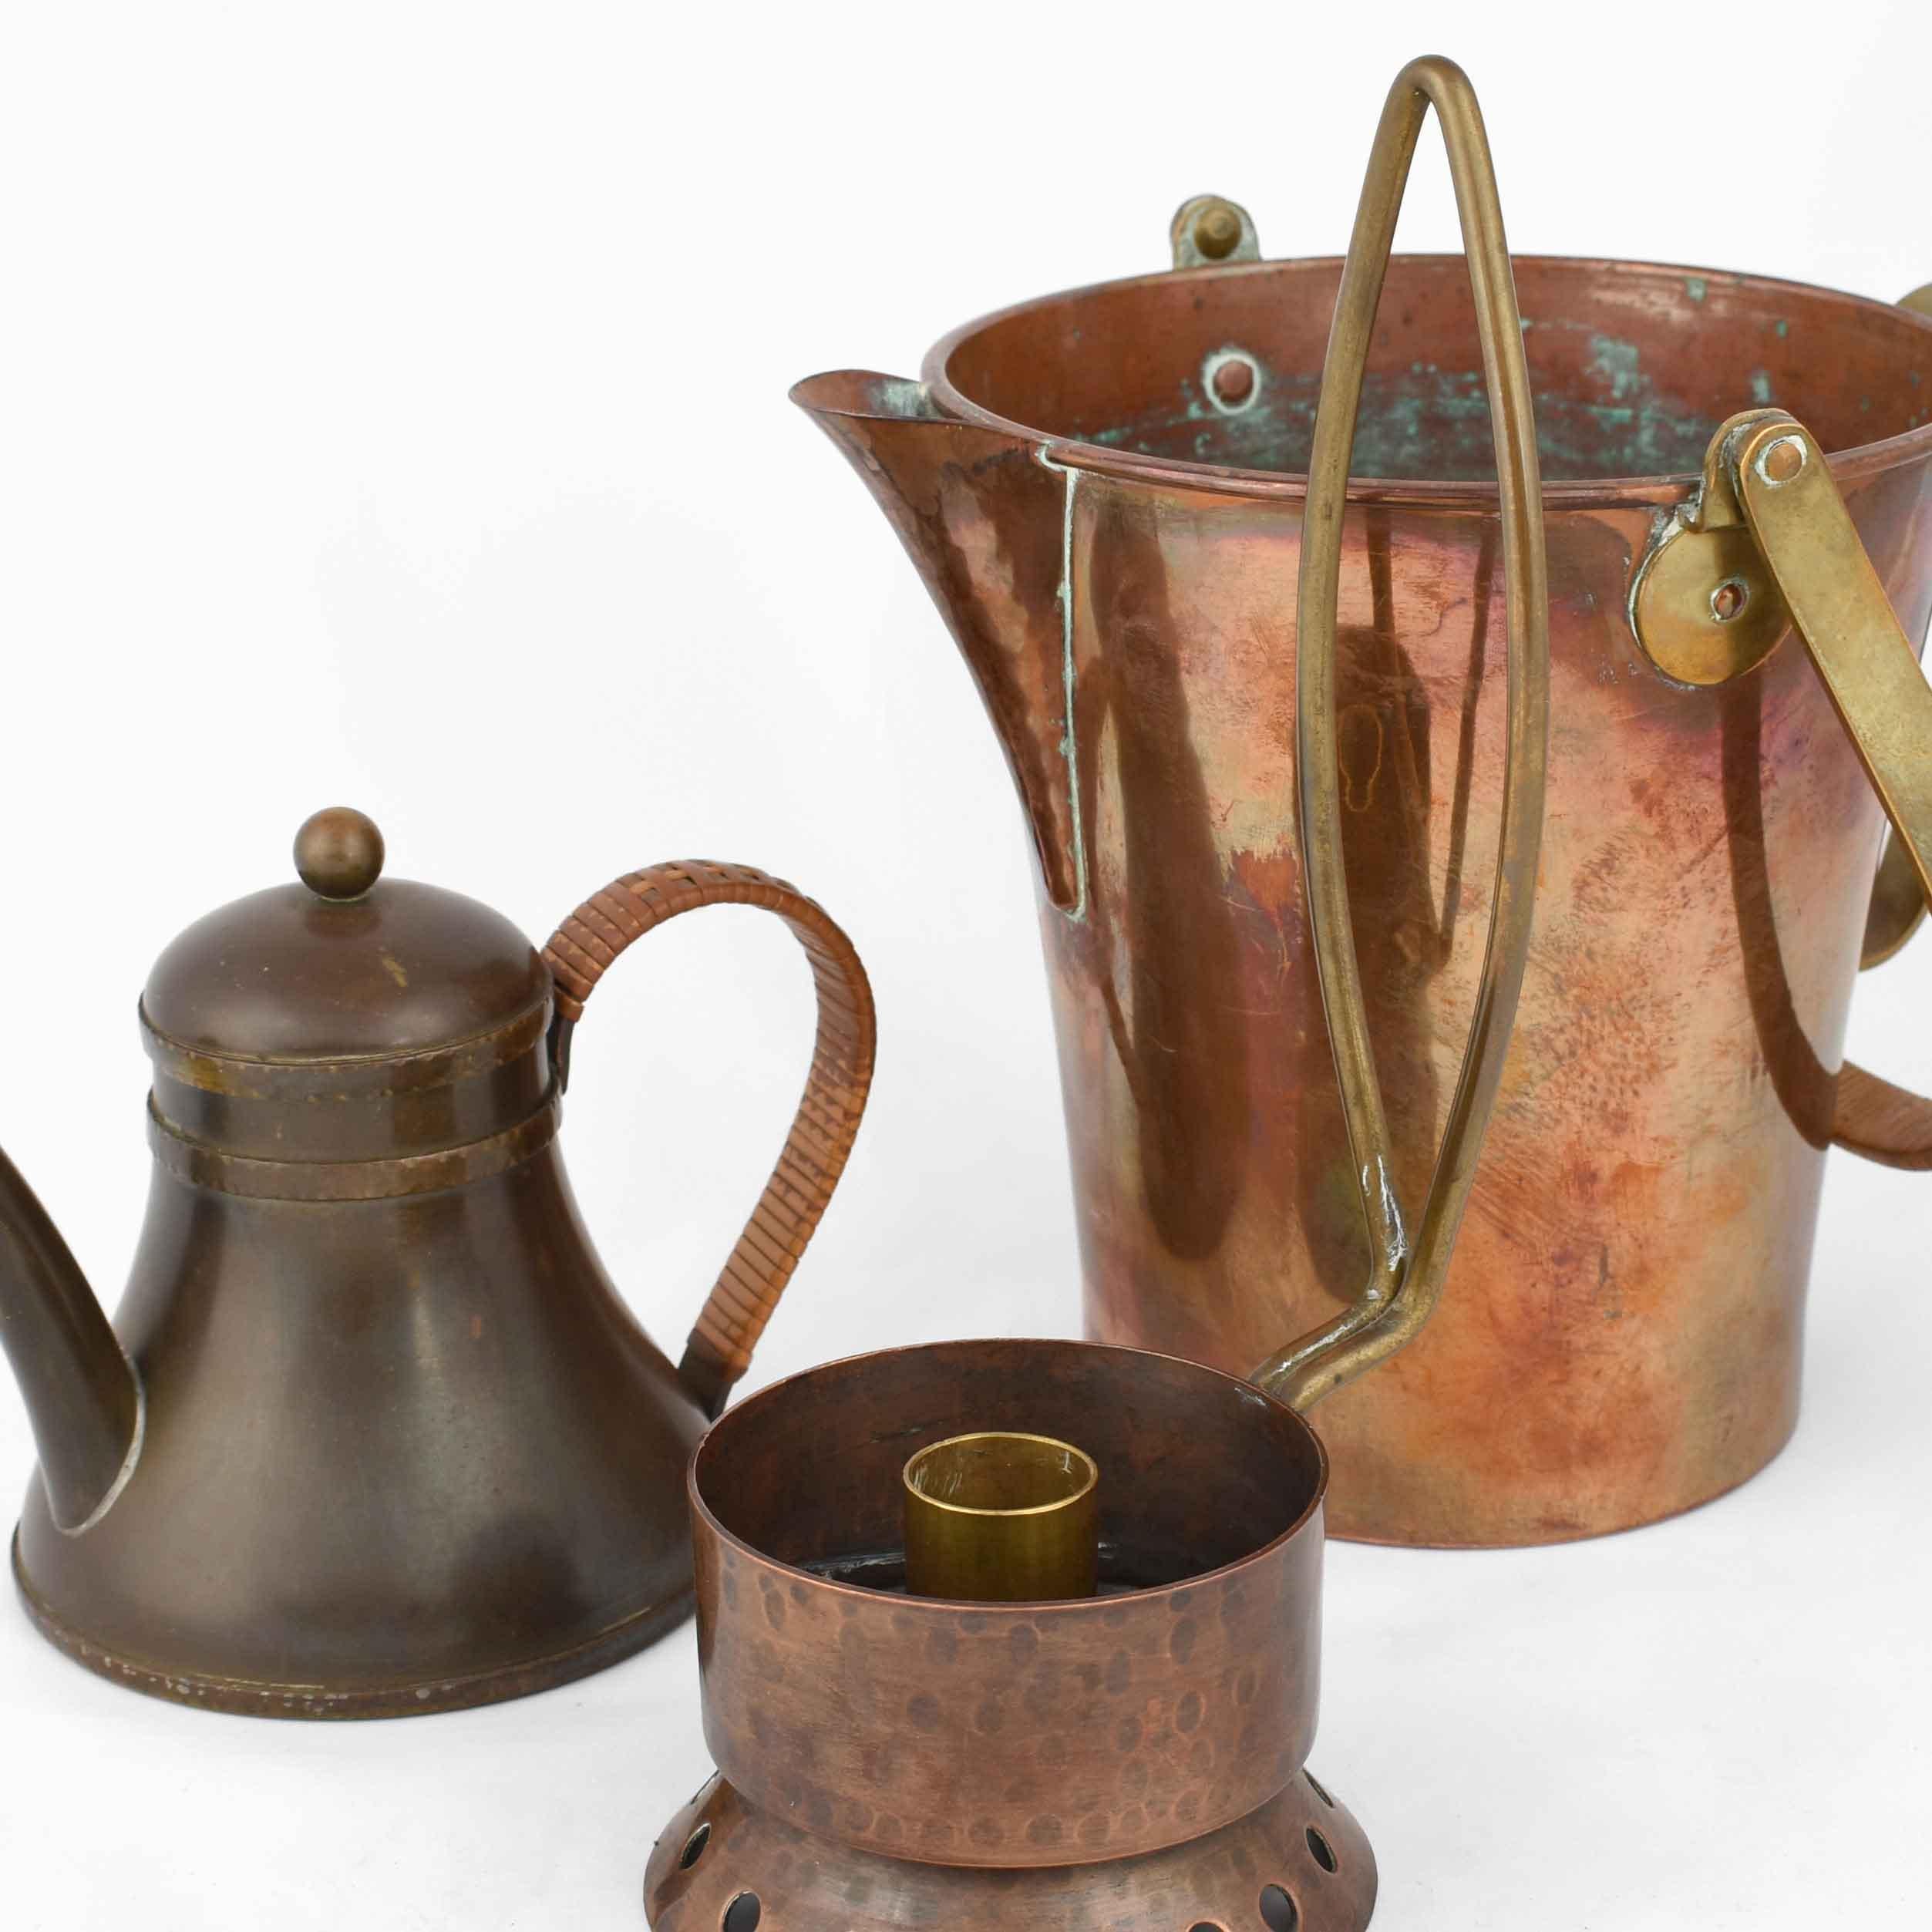 Buchrucker candlestick is an original set realized in the 1950s. 

Original copper and brass. The set includes: One circular tray (Ø 23.5 cm), one teapot (H. 16.5 cm), one coffee pot, one sugar bowl and two mugs.

Designed by Harald Buchrucker.